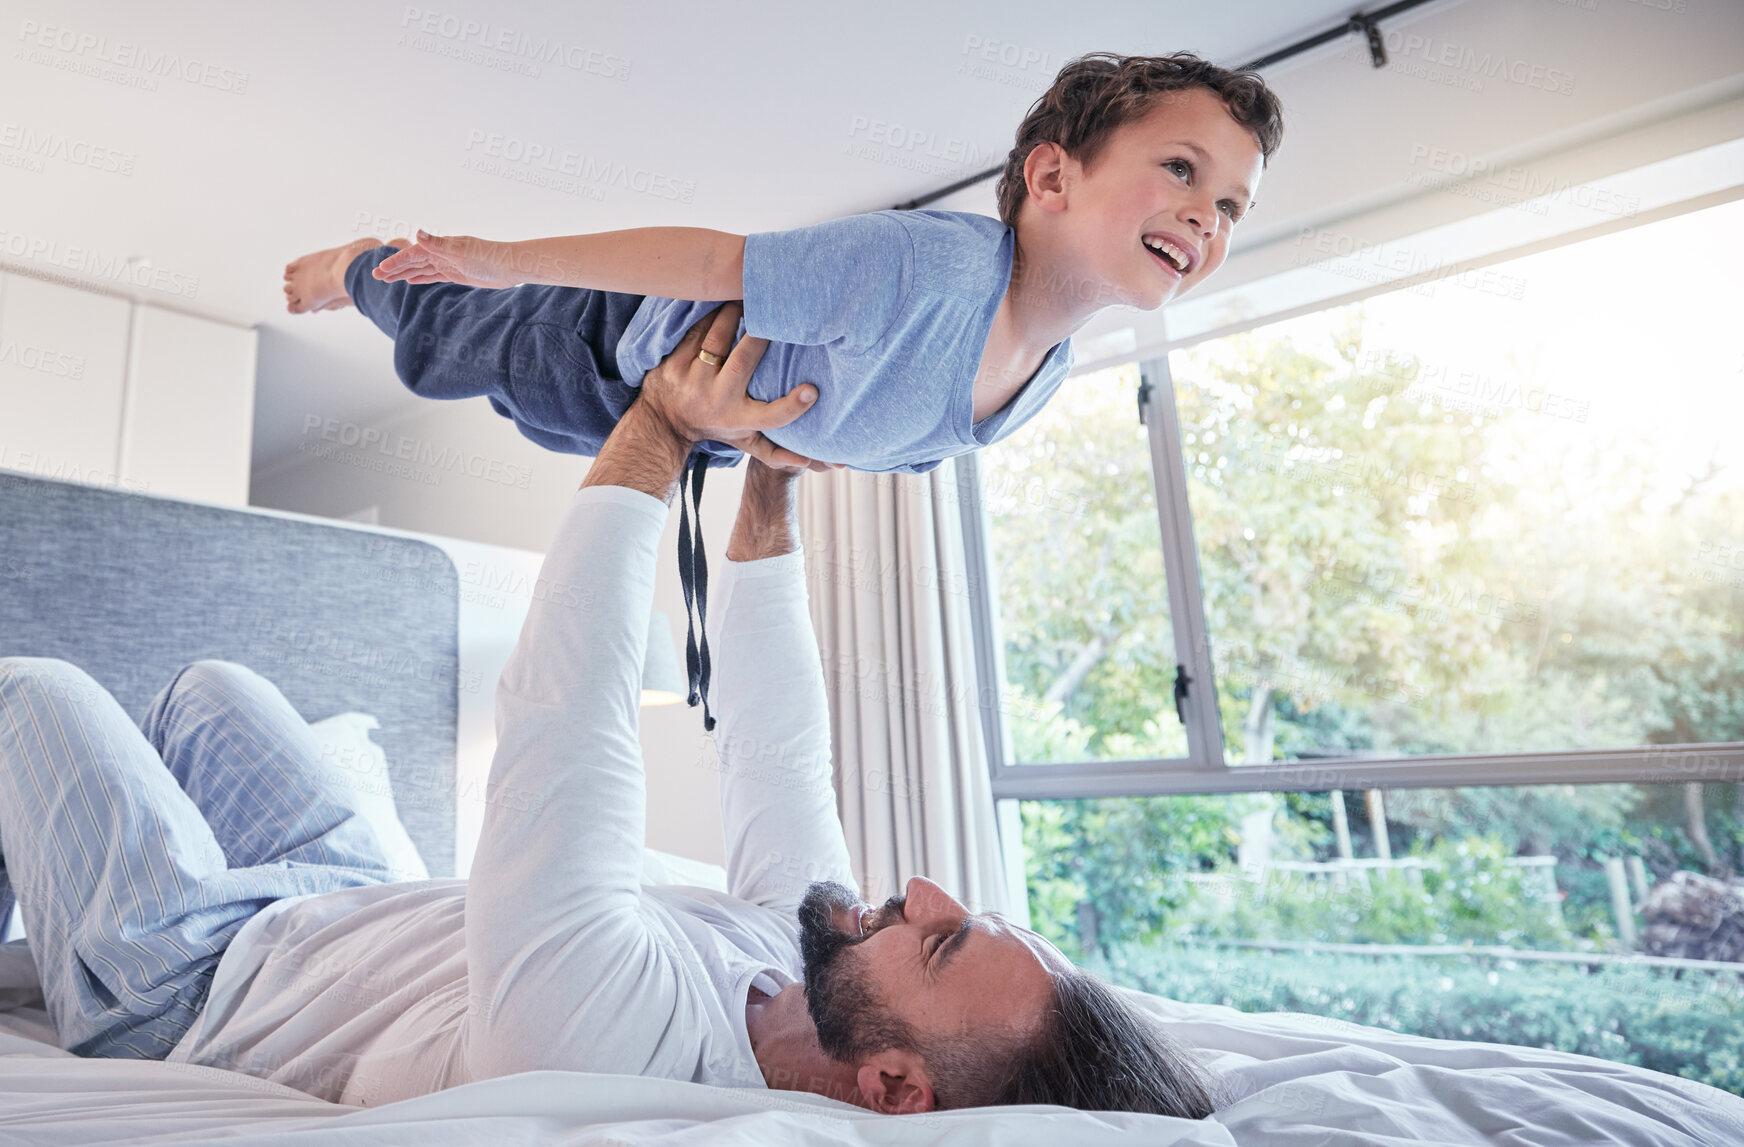 Buy stock photo Happy, airplane play and dad with child and happiness in a bedroom with trust and love. Happiness, father and young kid together in the air from flying game feeling excited with papa lift at home